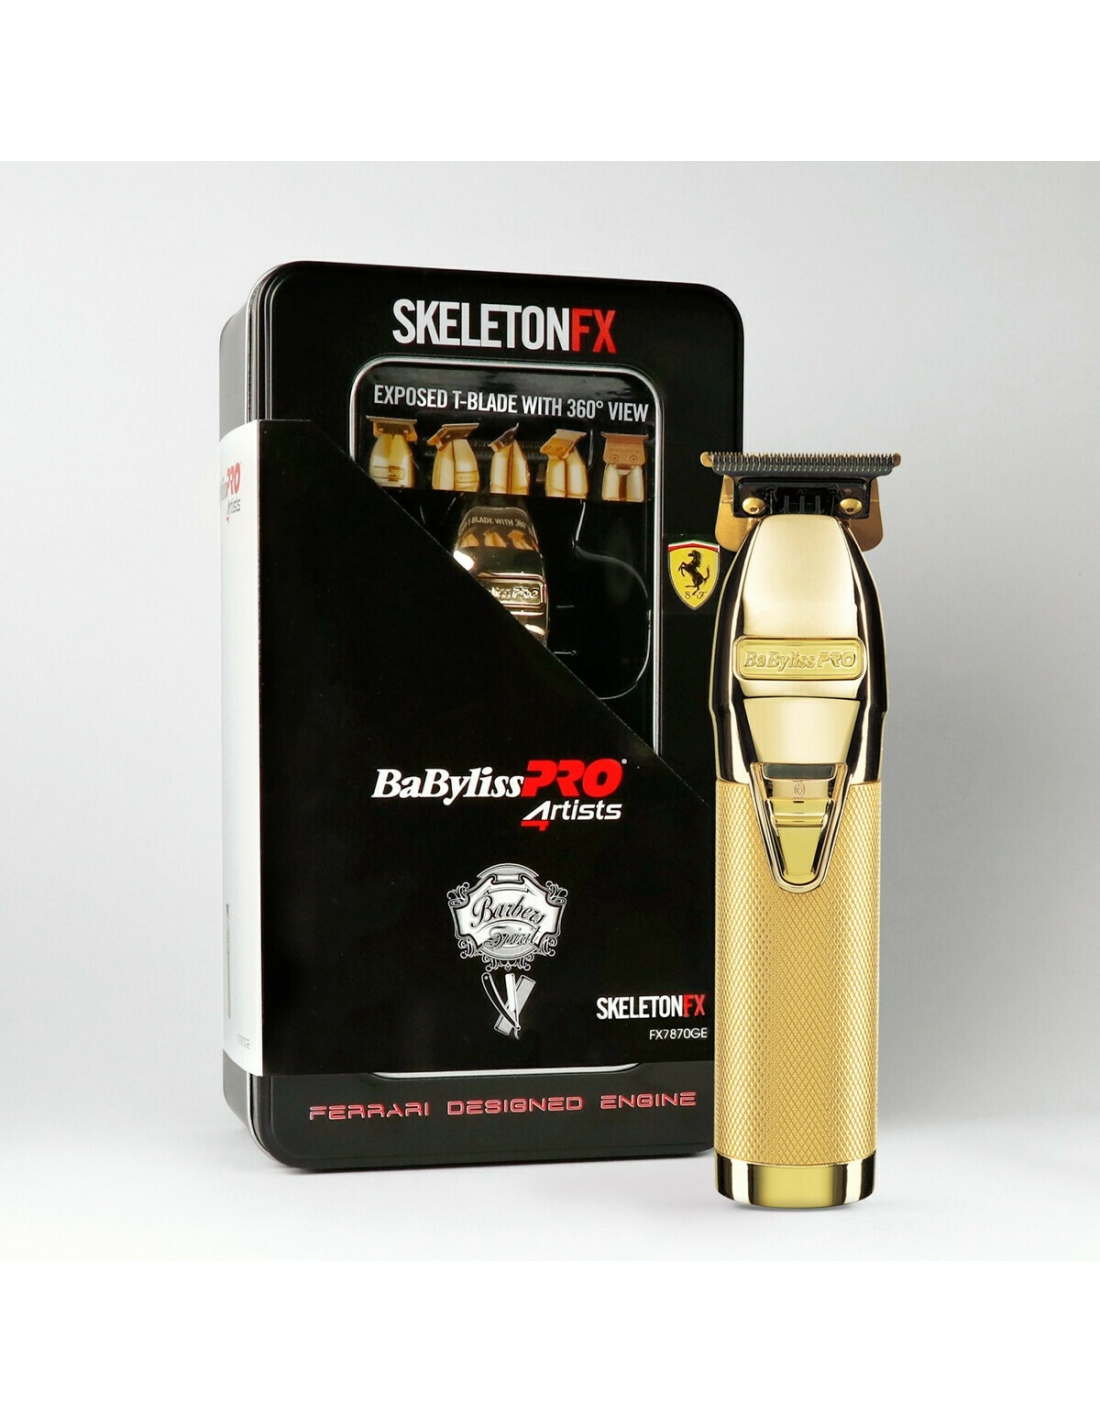 Babyliss Pro 4 Artists Skeleton Dlc Gold 2.0 Deep Tooth Head – BARBER FIRST